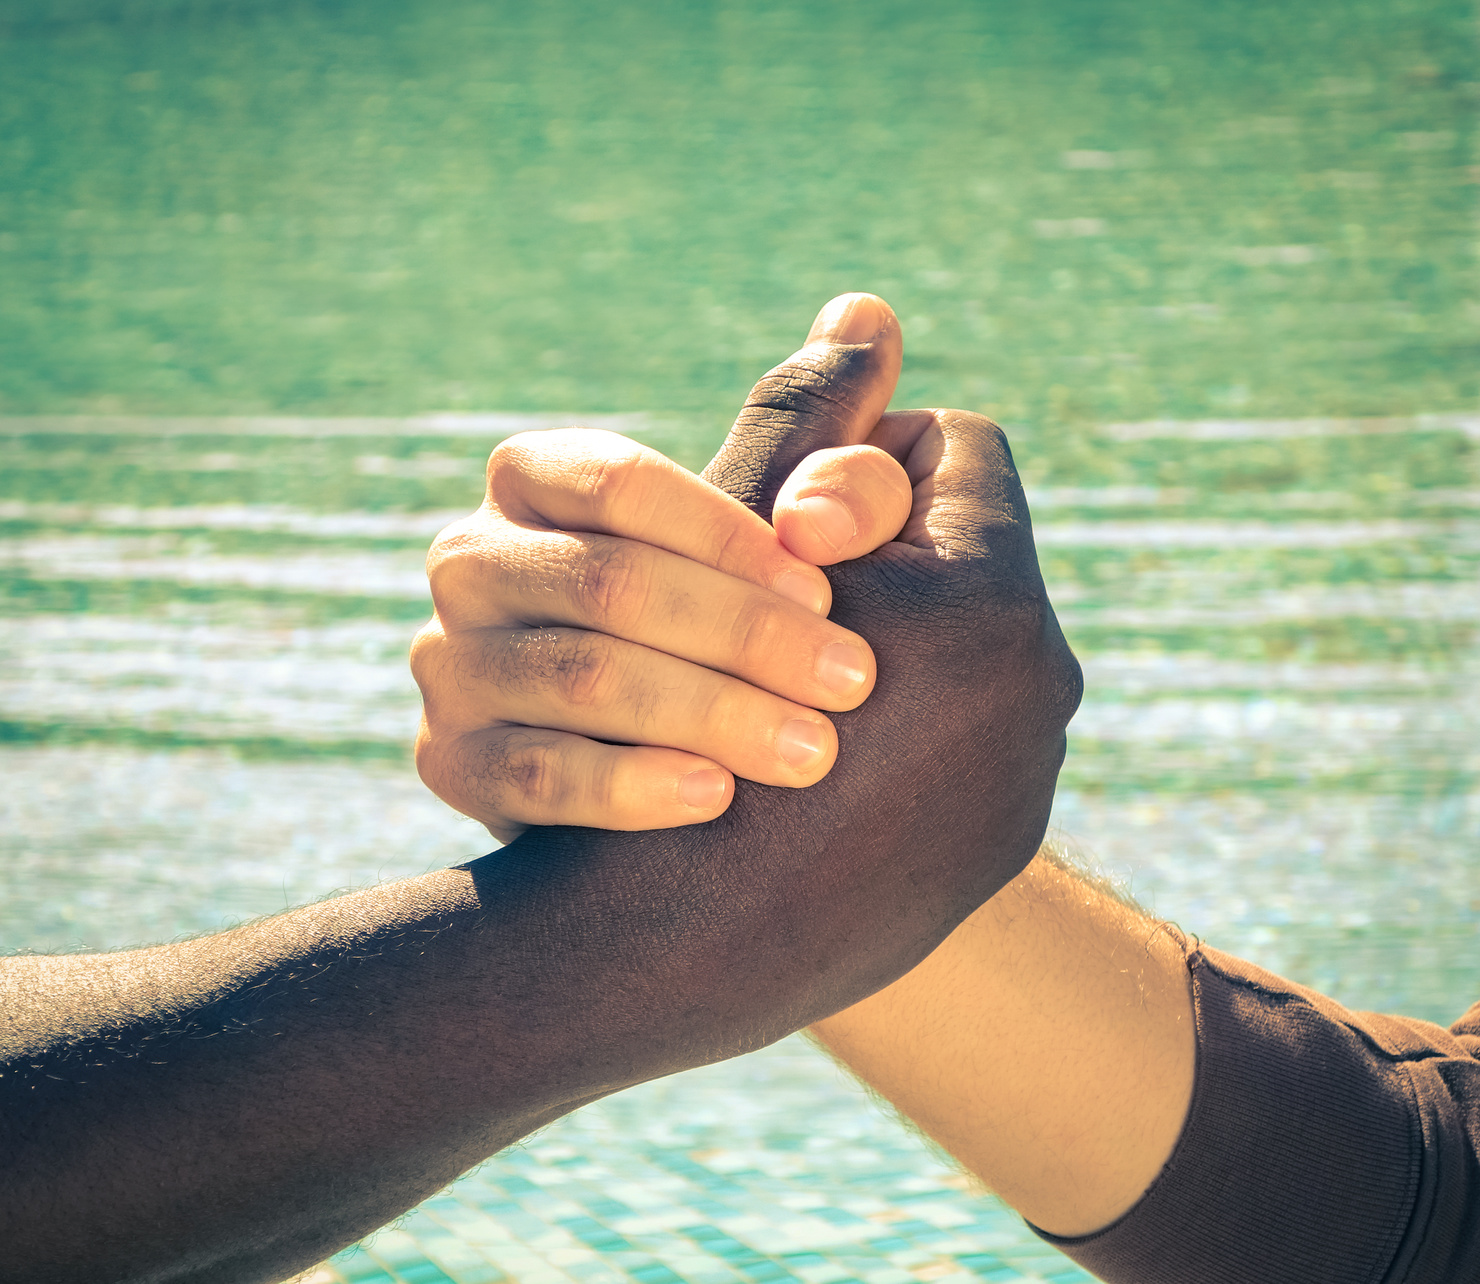 Black and white hands handshake against racism